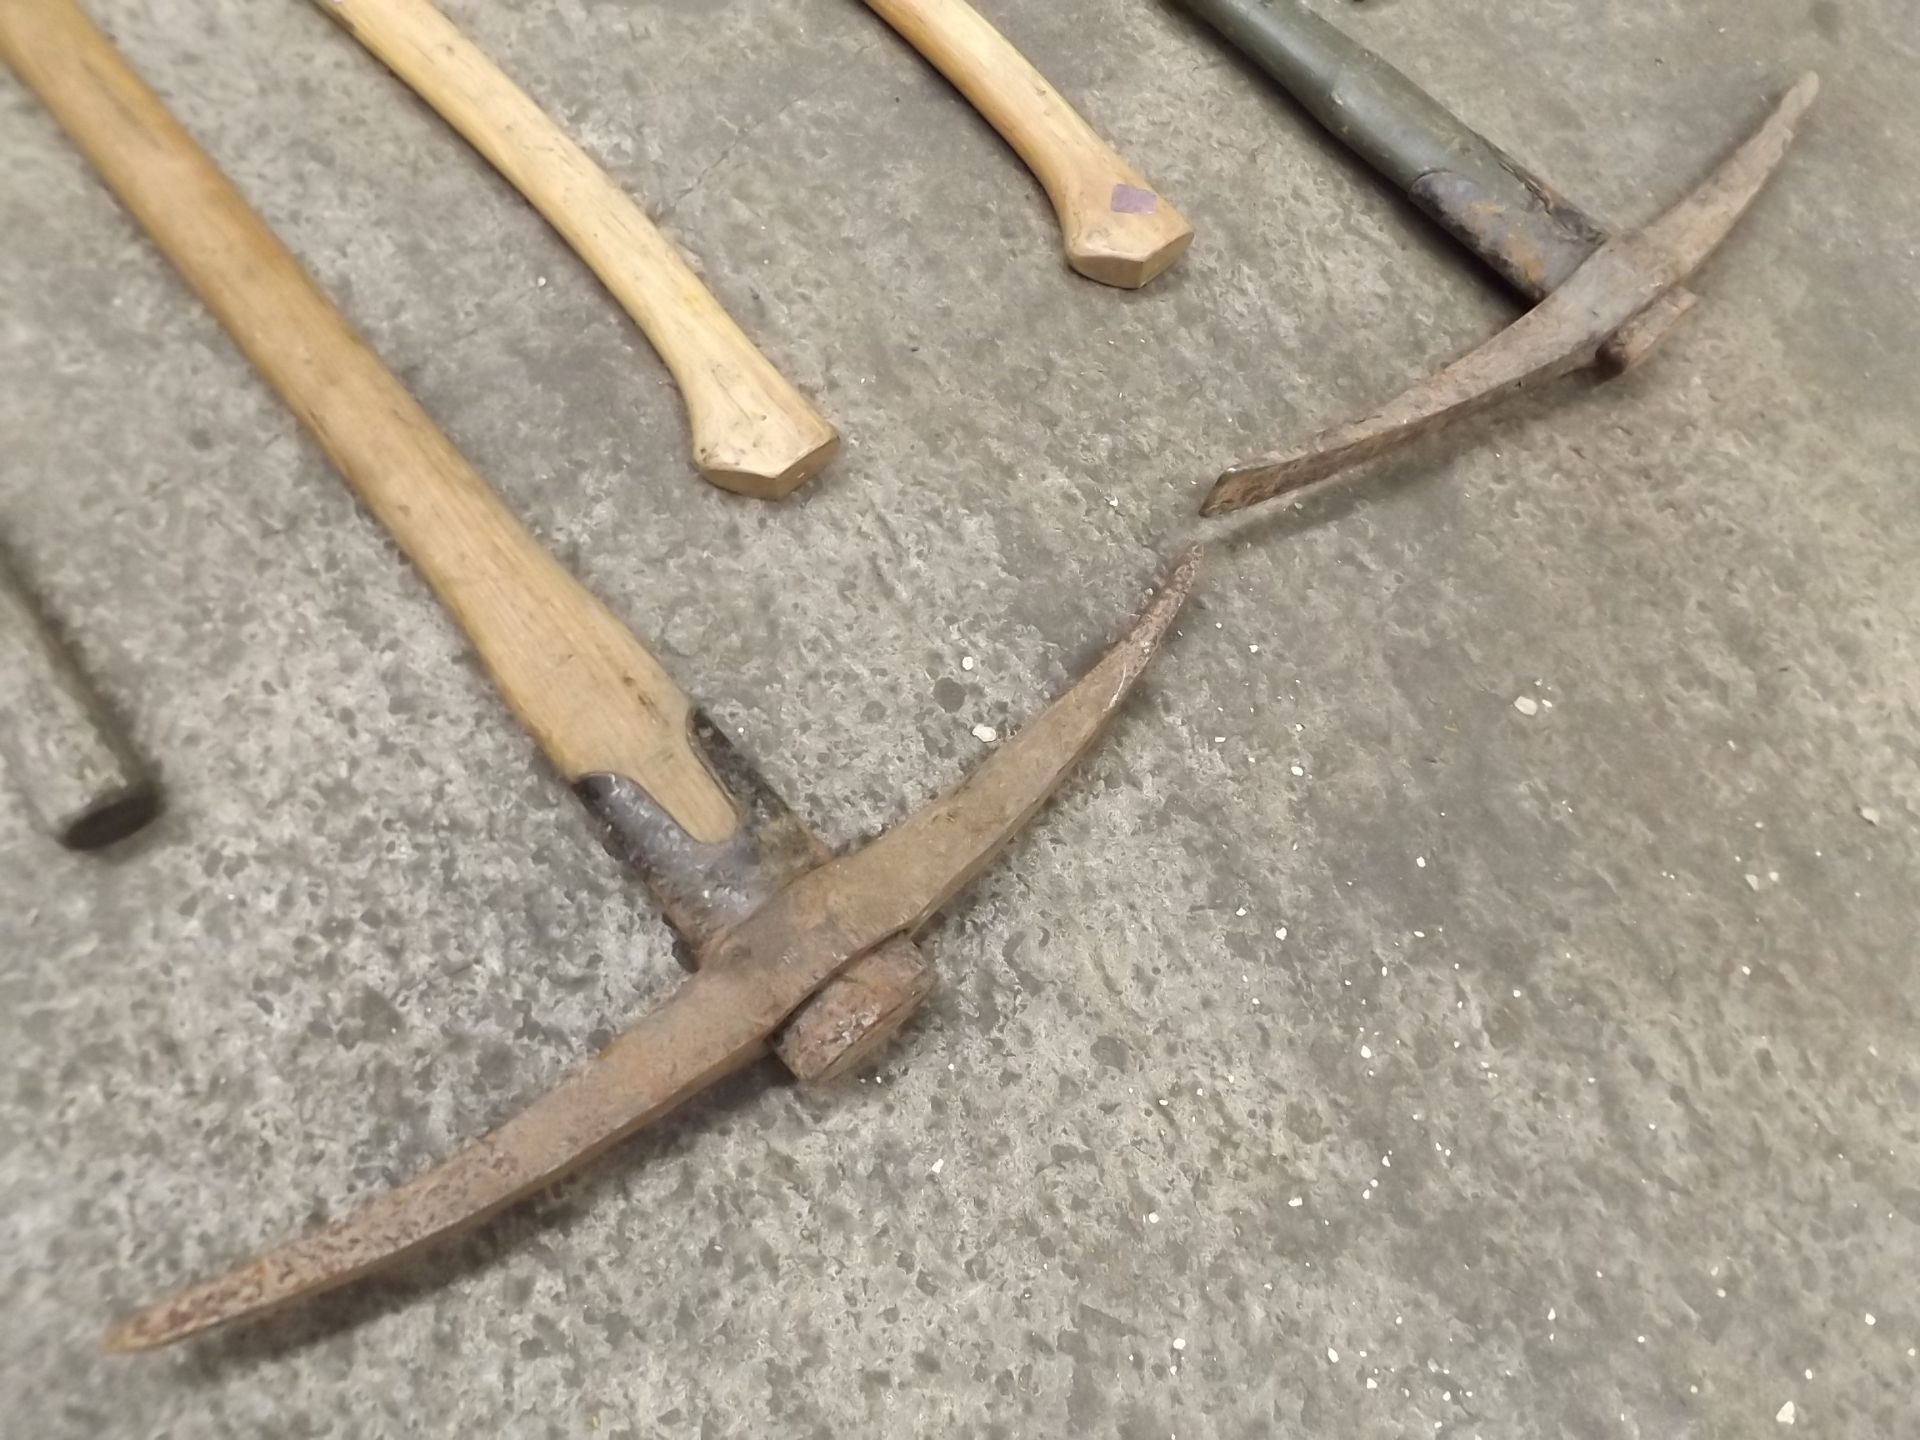 Mixed Hand Tools 2 x Axes, 2 x Pick Axes, 2 x Sledge Hammers - Image 2 of 3